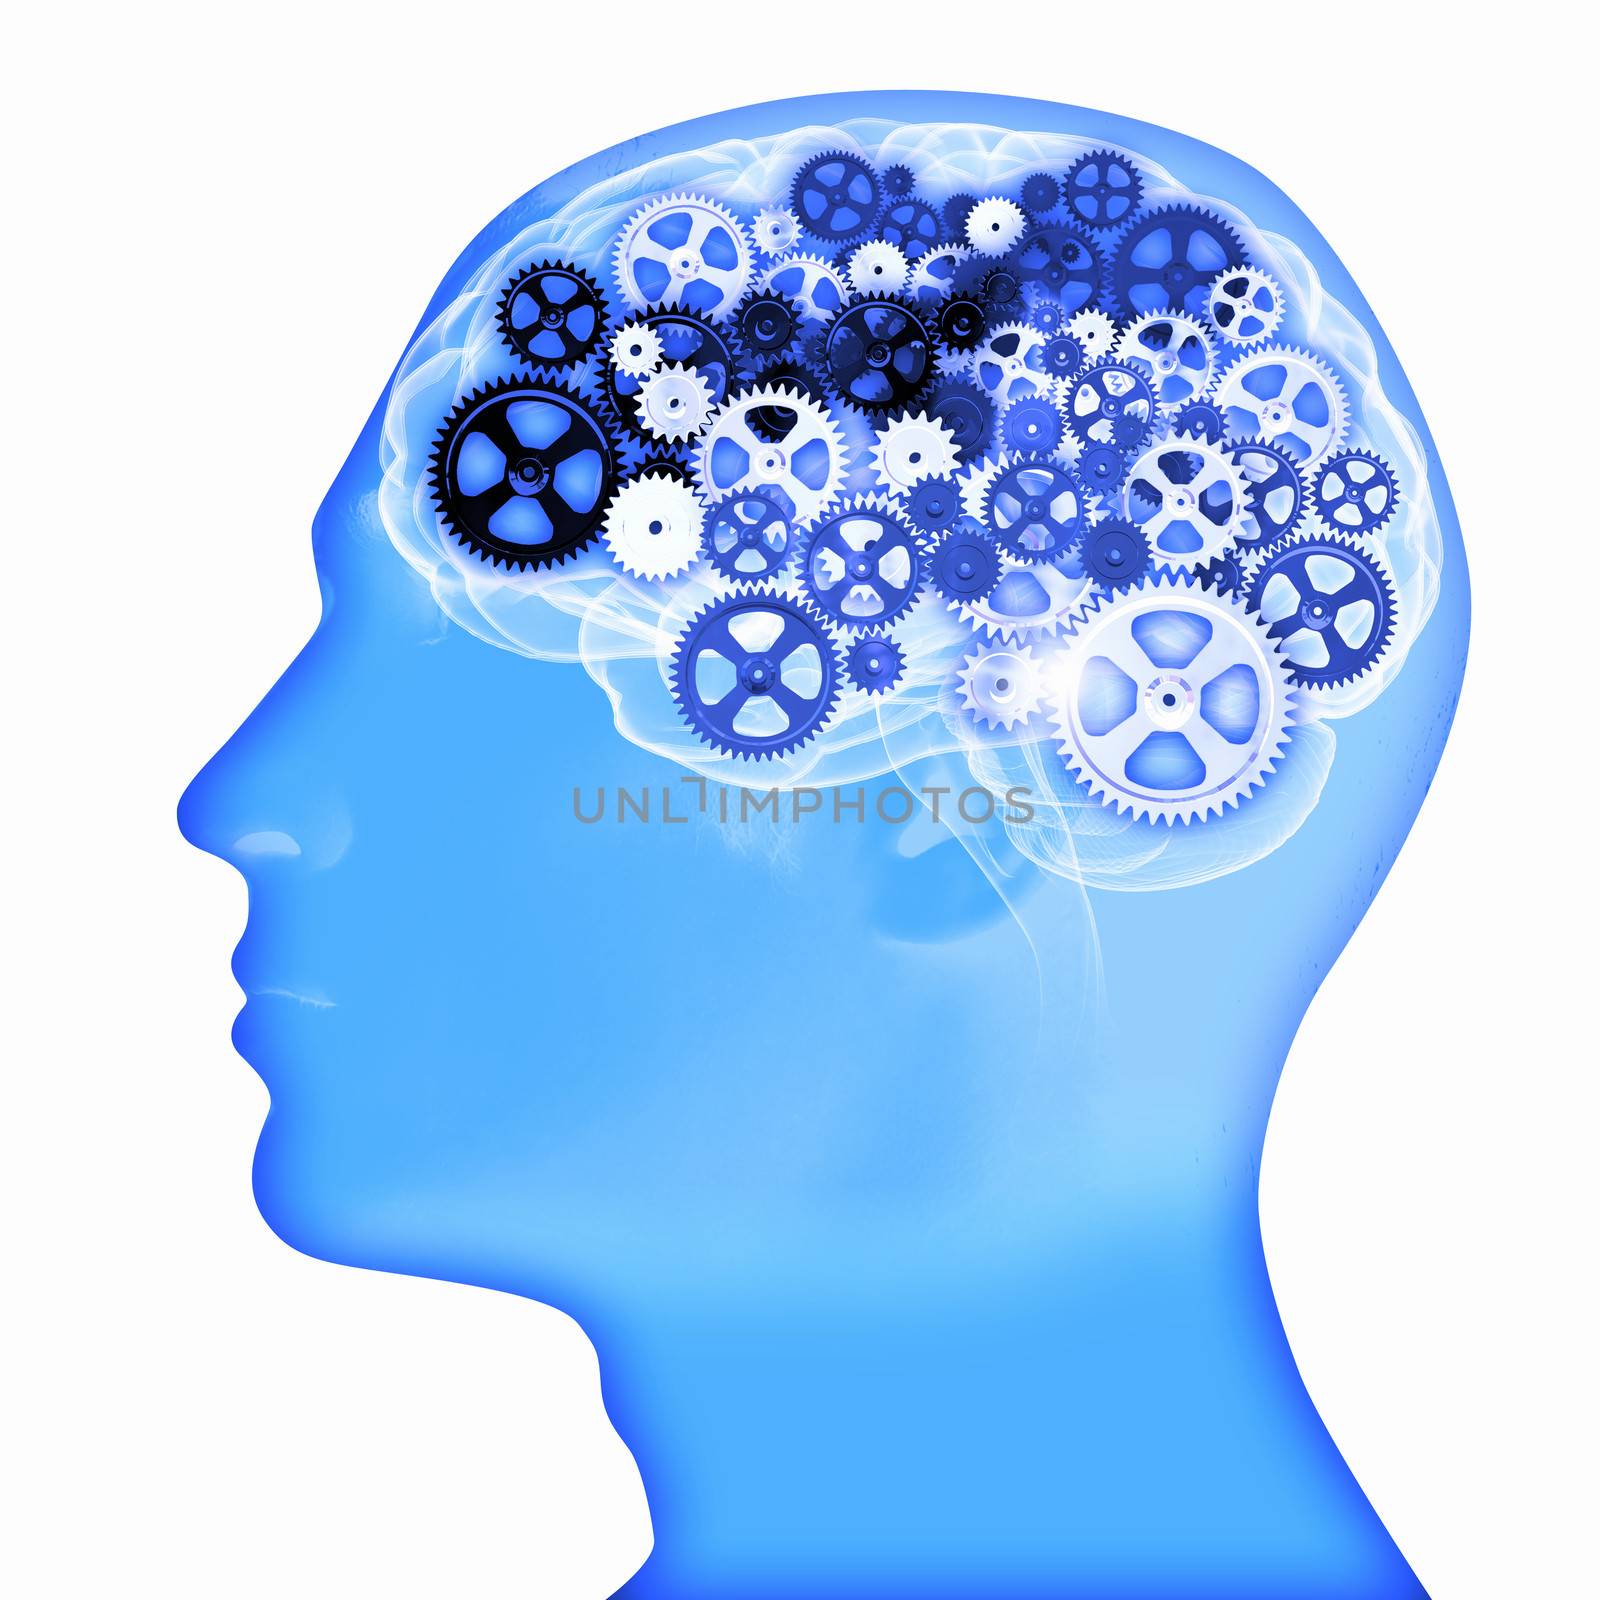 Human head silhouette with gears and cog wheel elements against white background